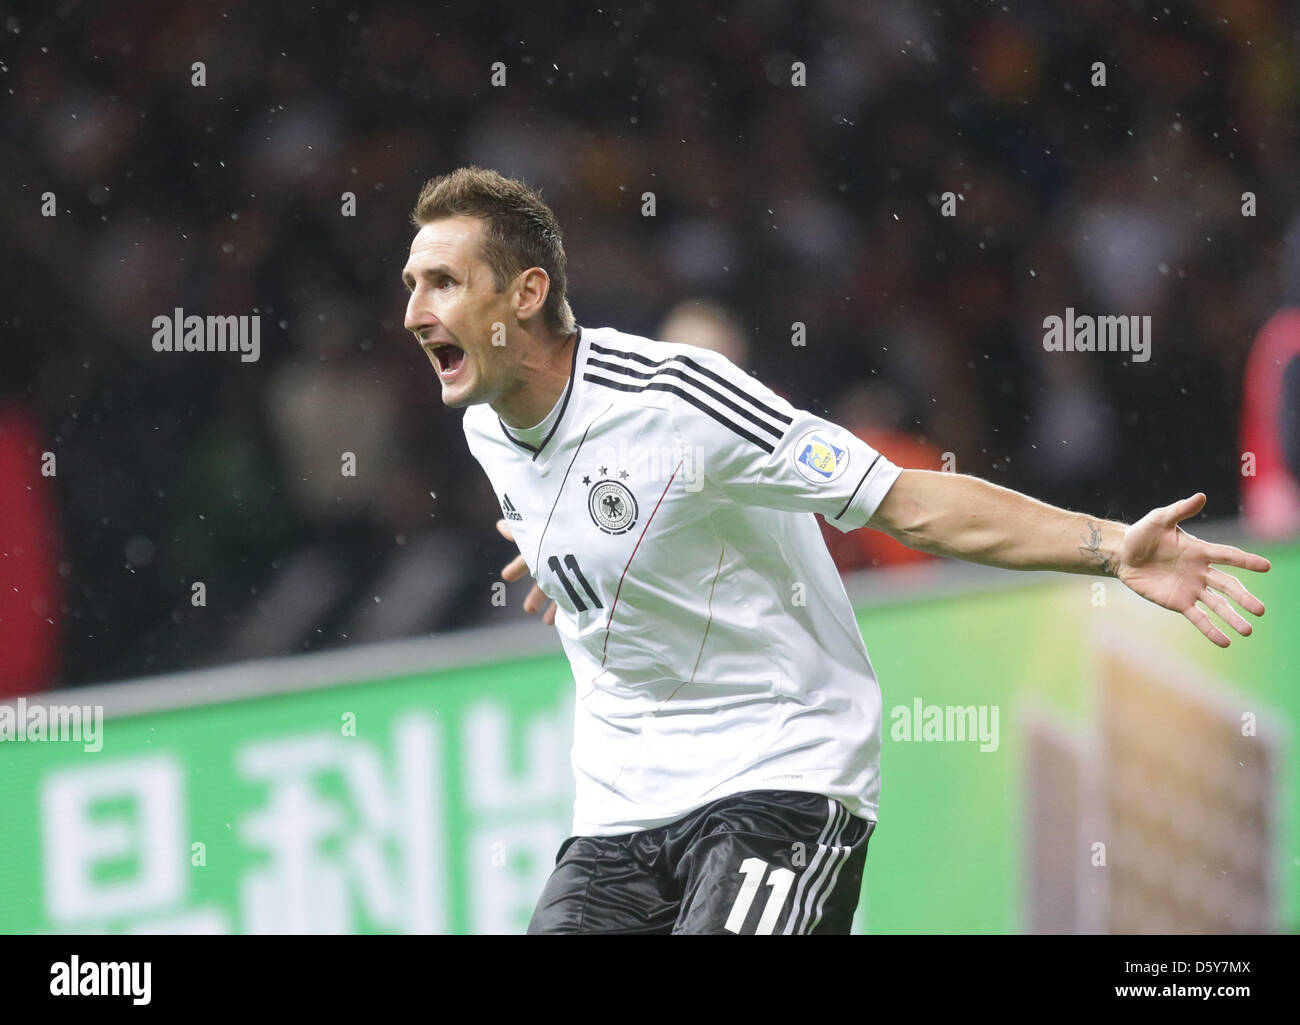 Germany's Miroslav Klose celebrates after scoring the opening goal 1-0 during the FIFA World Cup 2014 qualifying soccer match between Germany and Sweden at Olympic stadium in Berlin, Germany, 16 October 2012. Photo: Michael Kappeler/dpa  +++(c) dpa - Bildfunk+++ Stock Photo